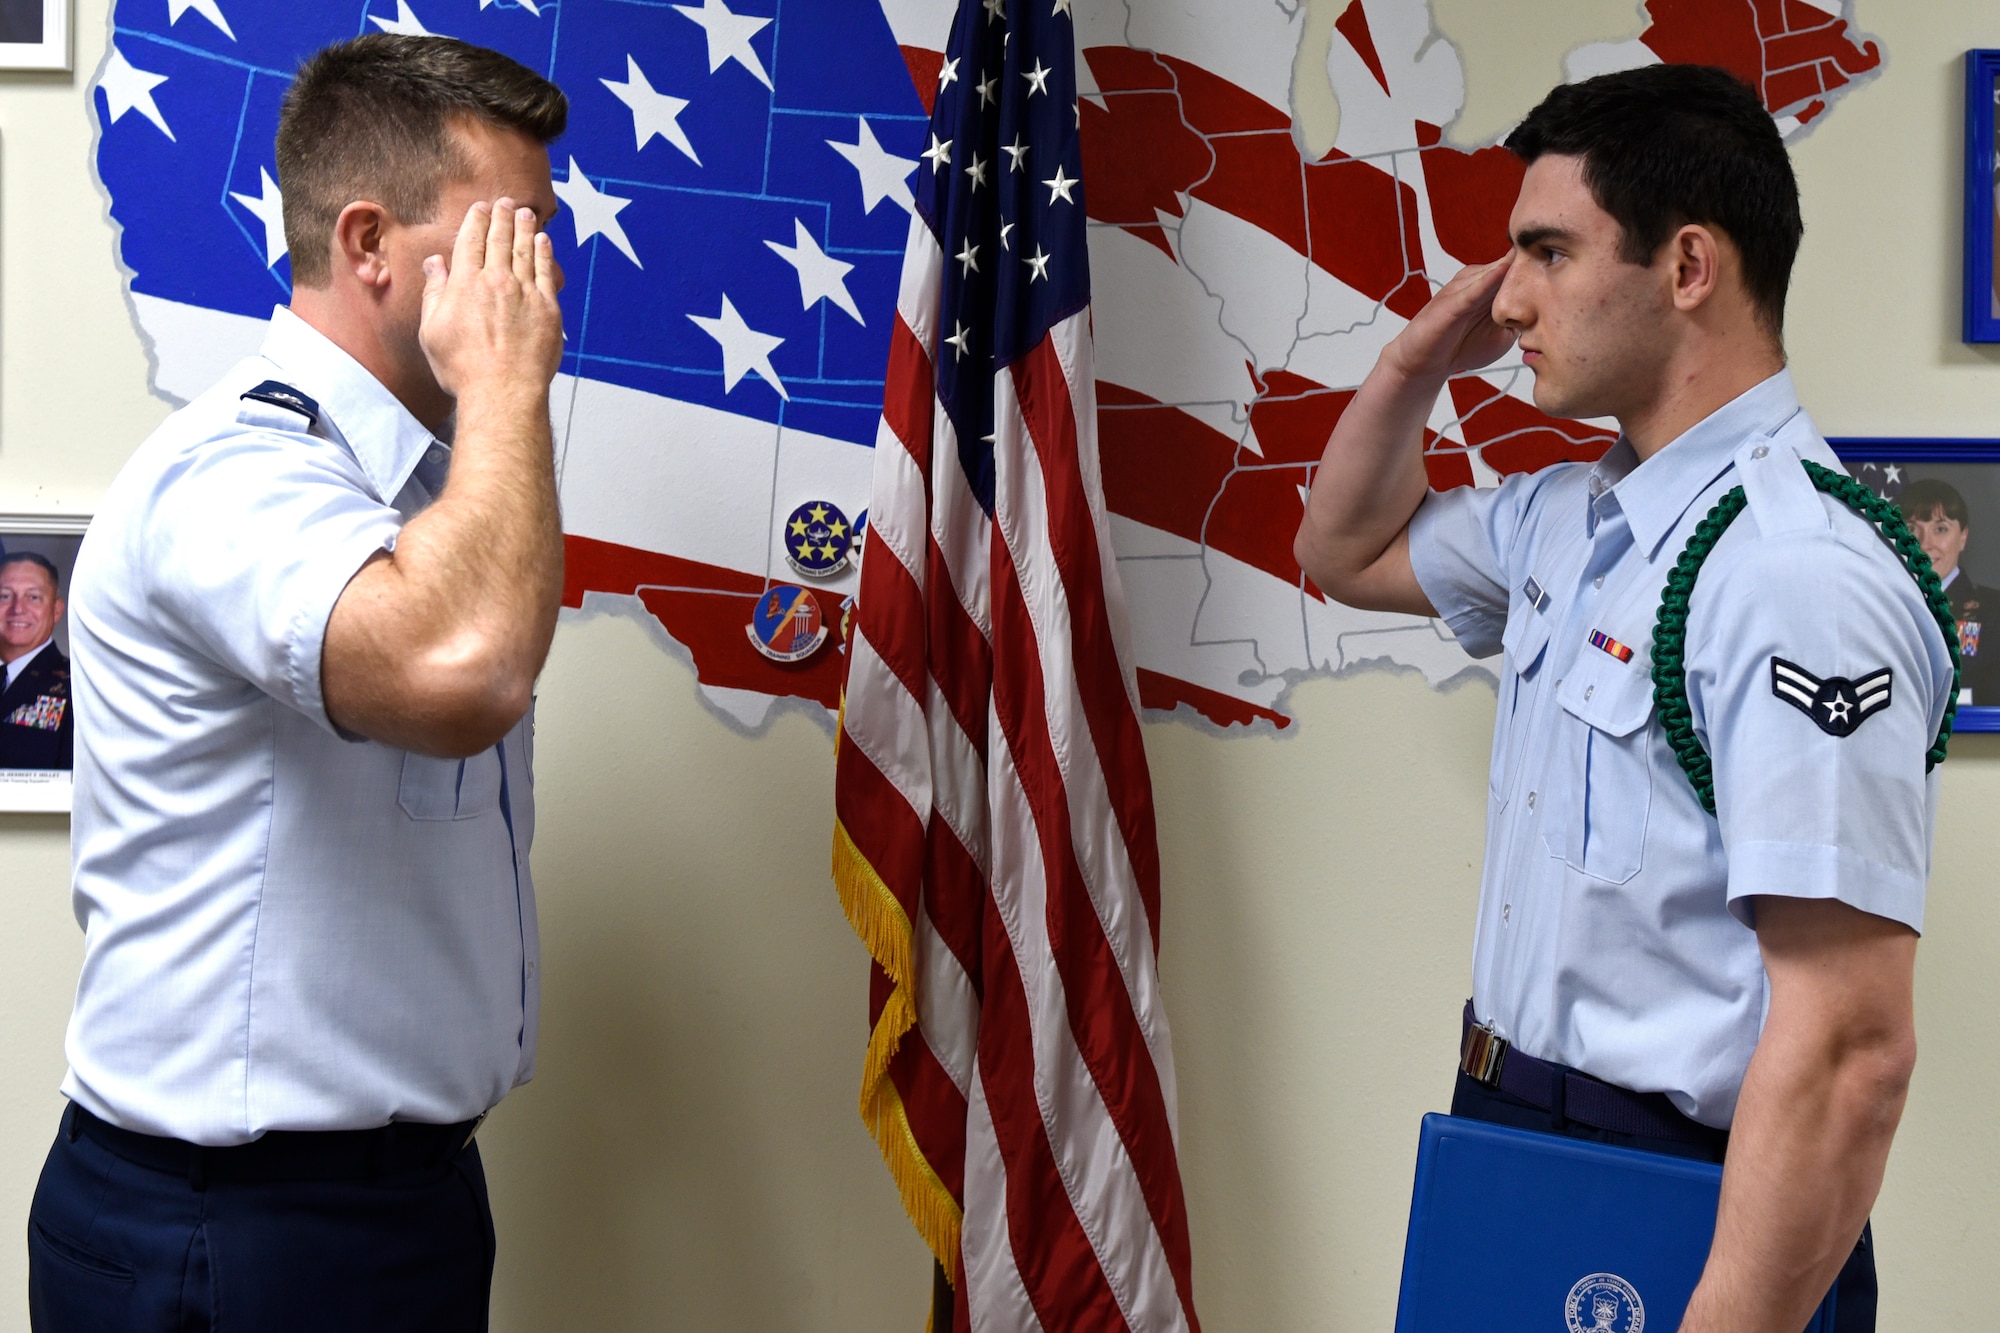 U.S. Air Force Lt. Col. Michael McCourt, 312th Training Squadron commander, salutes Airman 1st Class Nicolas Smaracheck, 315th Training Squadron student, after presenting him with the 17th Training Group Rope of the Month award at Brandenburg Hall on Goodfellow Air Force Base, Texas, Feb. 7, 2020. The green rope is the first of the leadership ropes, they are key players in keeping the order of a detachment. (U.S. Air Force photo by Airman 1st Class Zachary Chapman)